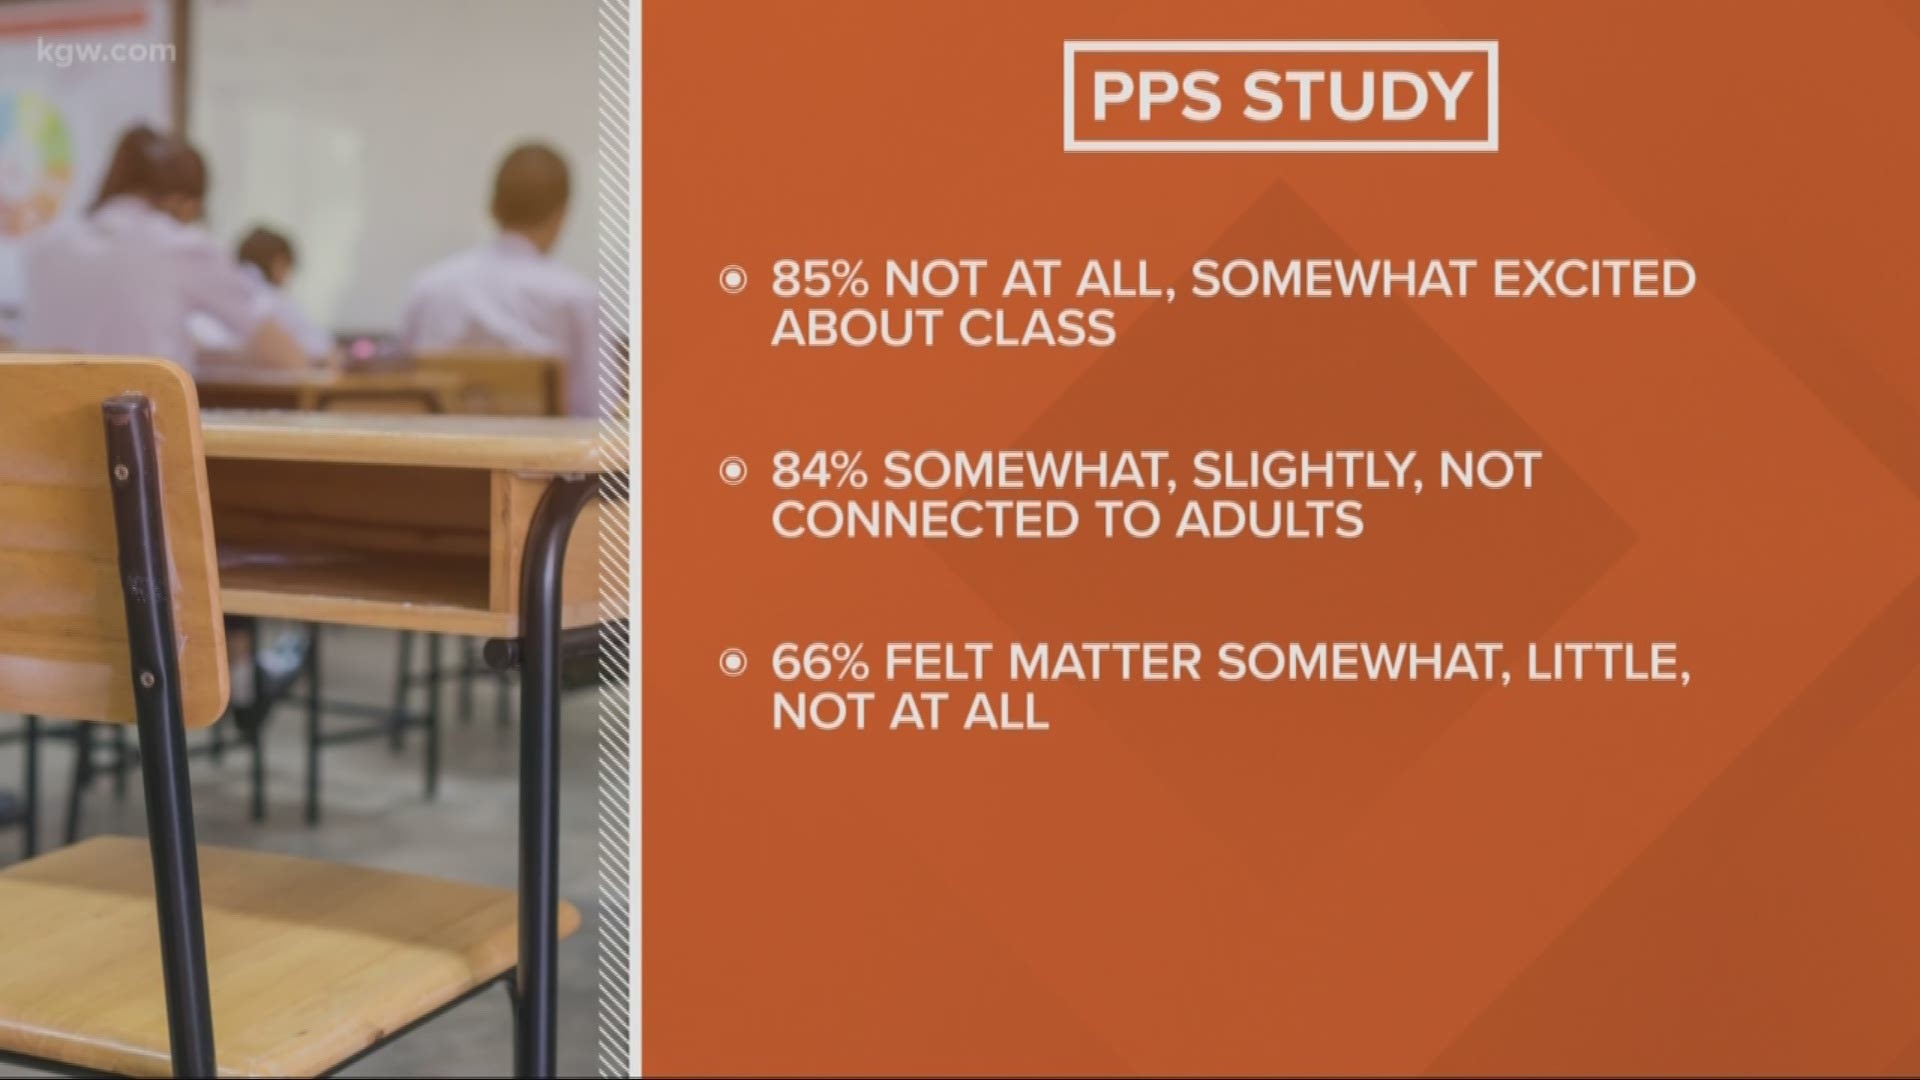 Some 85% of students surveyed said they were not at all or somewhat excited about class.